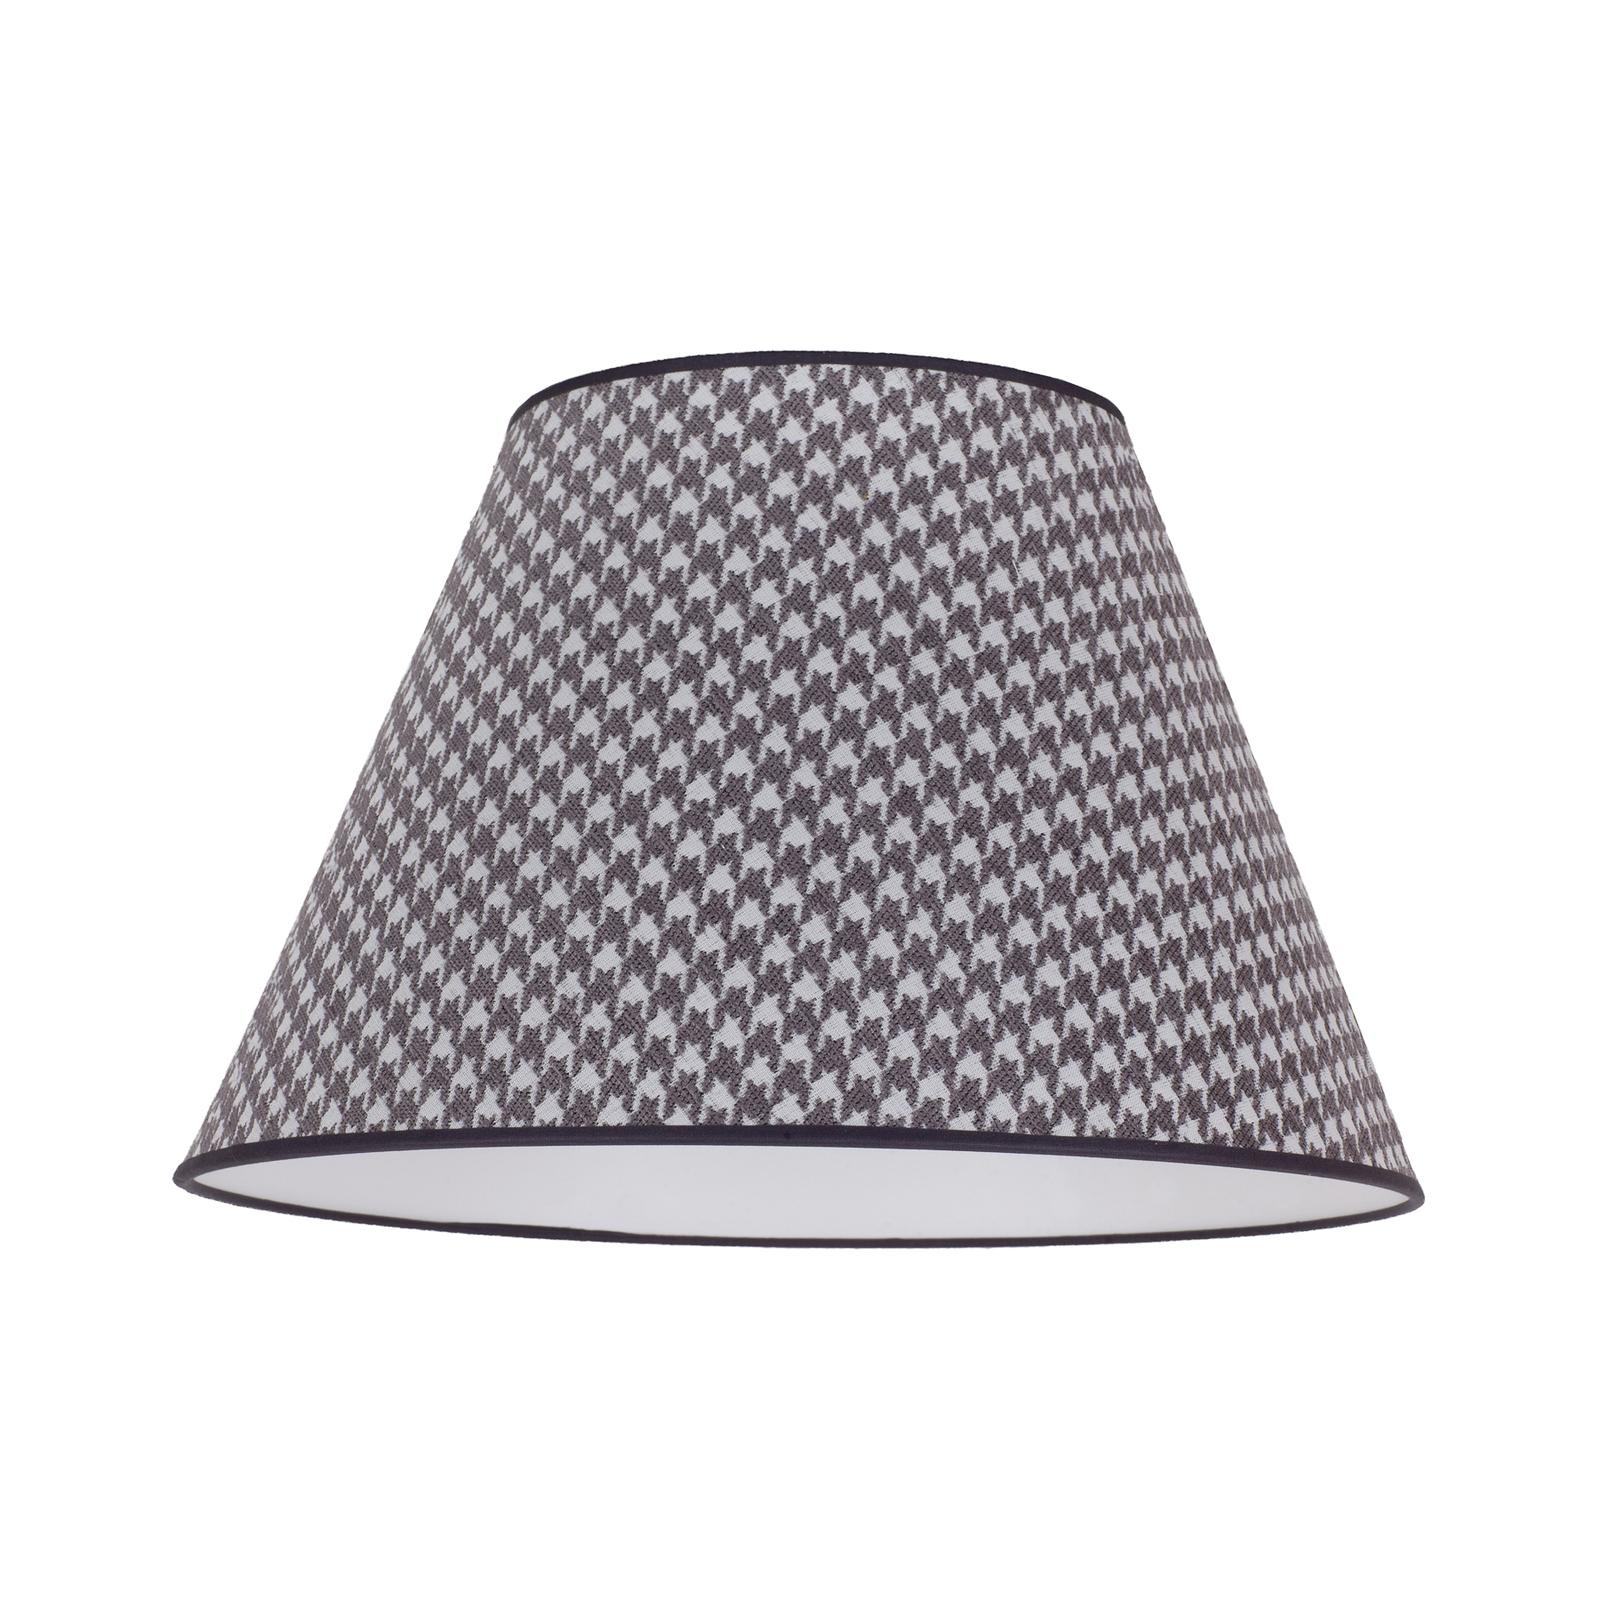 Sofia lampshade 31 cm, houndstooth pattern grey